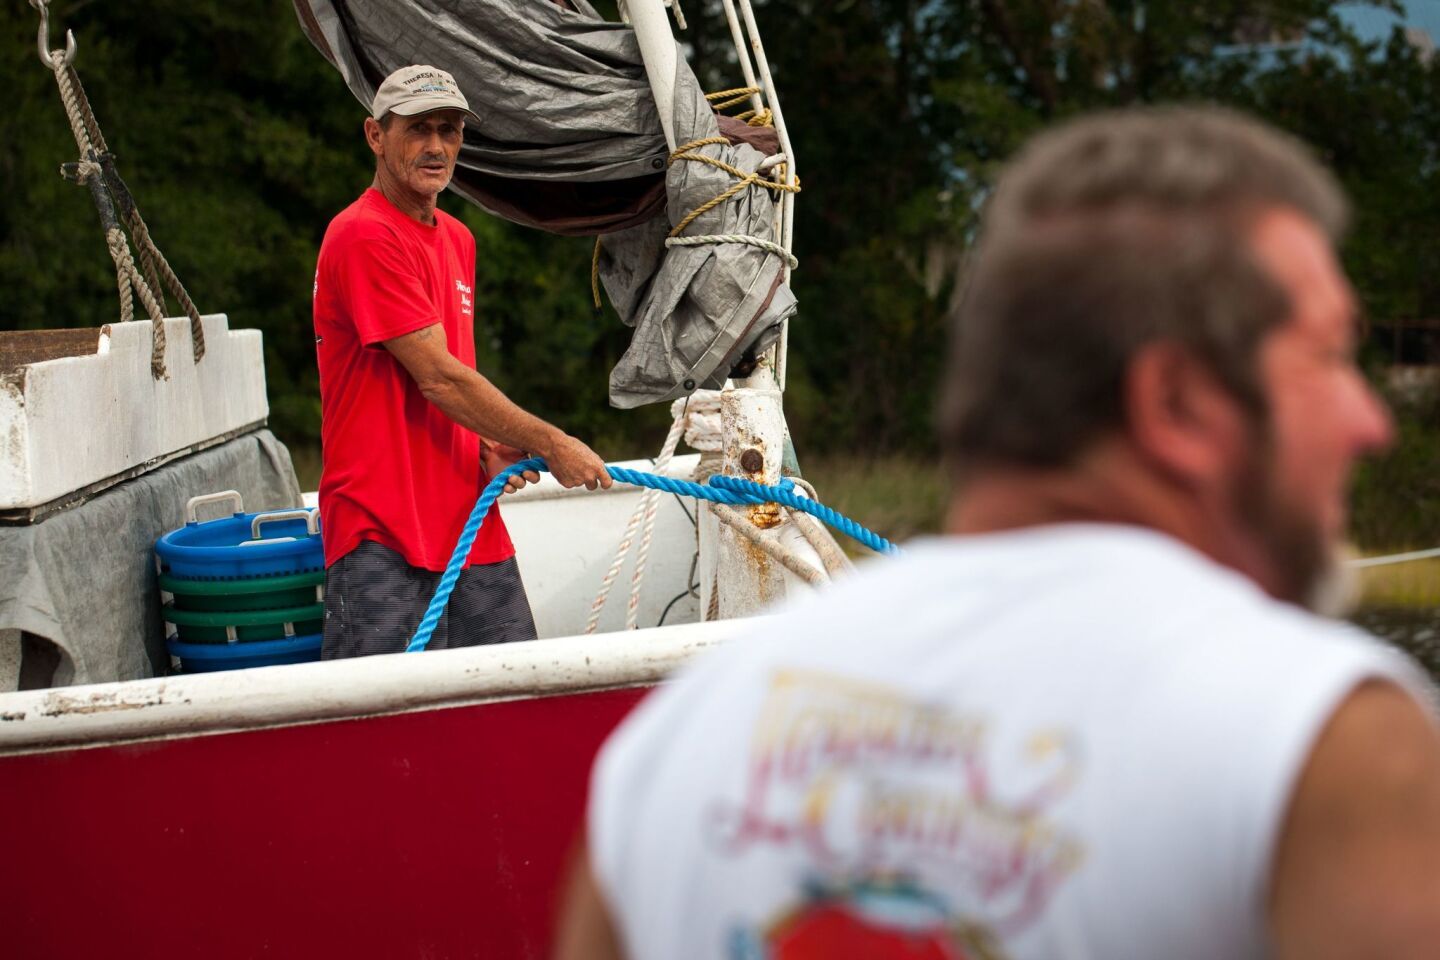 Crew members and boat owners help to moor the 'Miss Janice,' a shrimp boat, to the dock at Mitchell Seafood on Wheeler Creek in Sneads Ferry, North Carolina on September 13, 2018 in advance of Hurricane Florence. - Hurricane Florence edged closer to the east coast of the US Thursday, with tropical-force winds and rain already lashing barrier islands just off the North Carolina mainland. The huge storm weakened to a Category 2 hurricane overnight, but forecasters warned that it still packed a dangerous punch, 110 mile-an-hour (175 kph) winds and torrential rains.